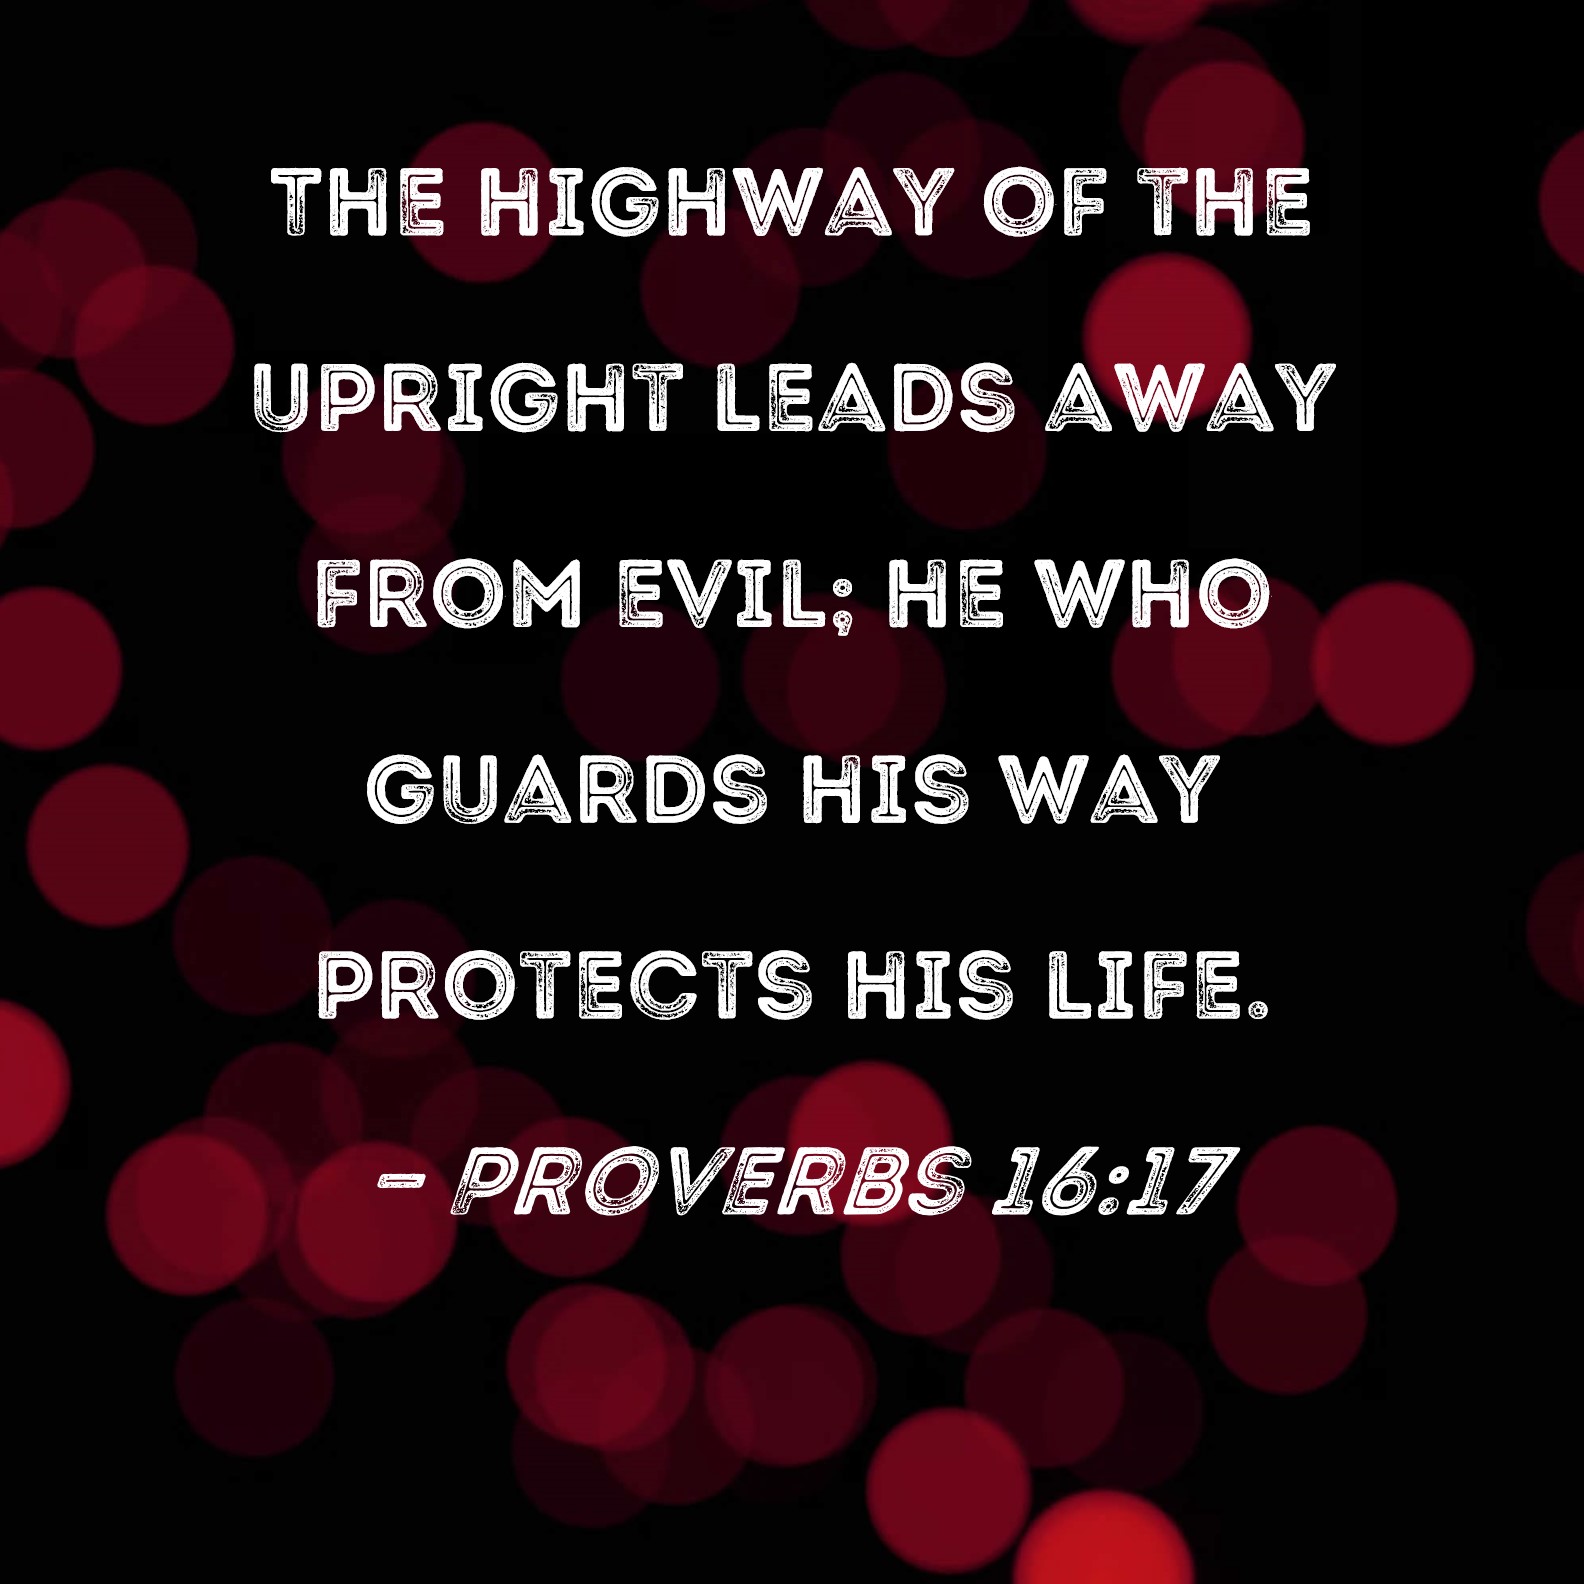 Proverbs 1617 The Highway Of The Upright Leads Away From Evil He Who Guards His Way Protects